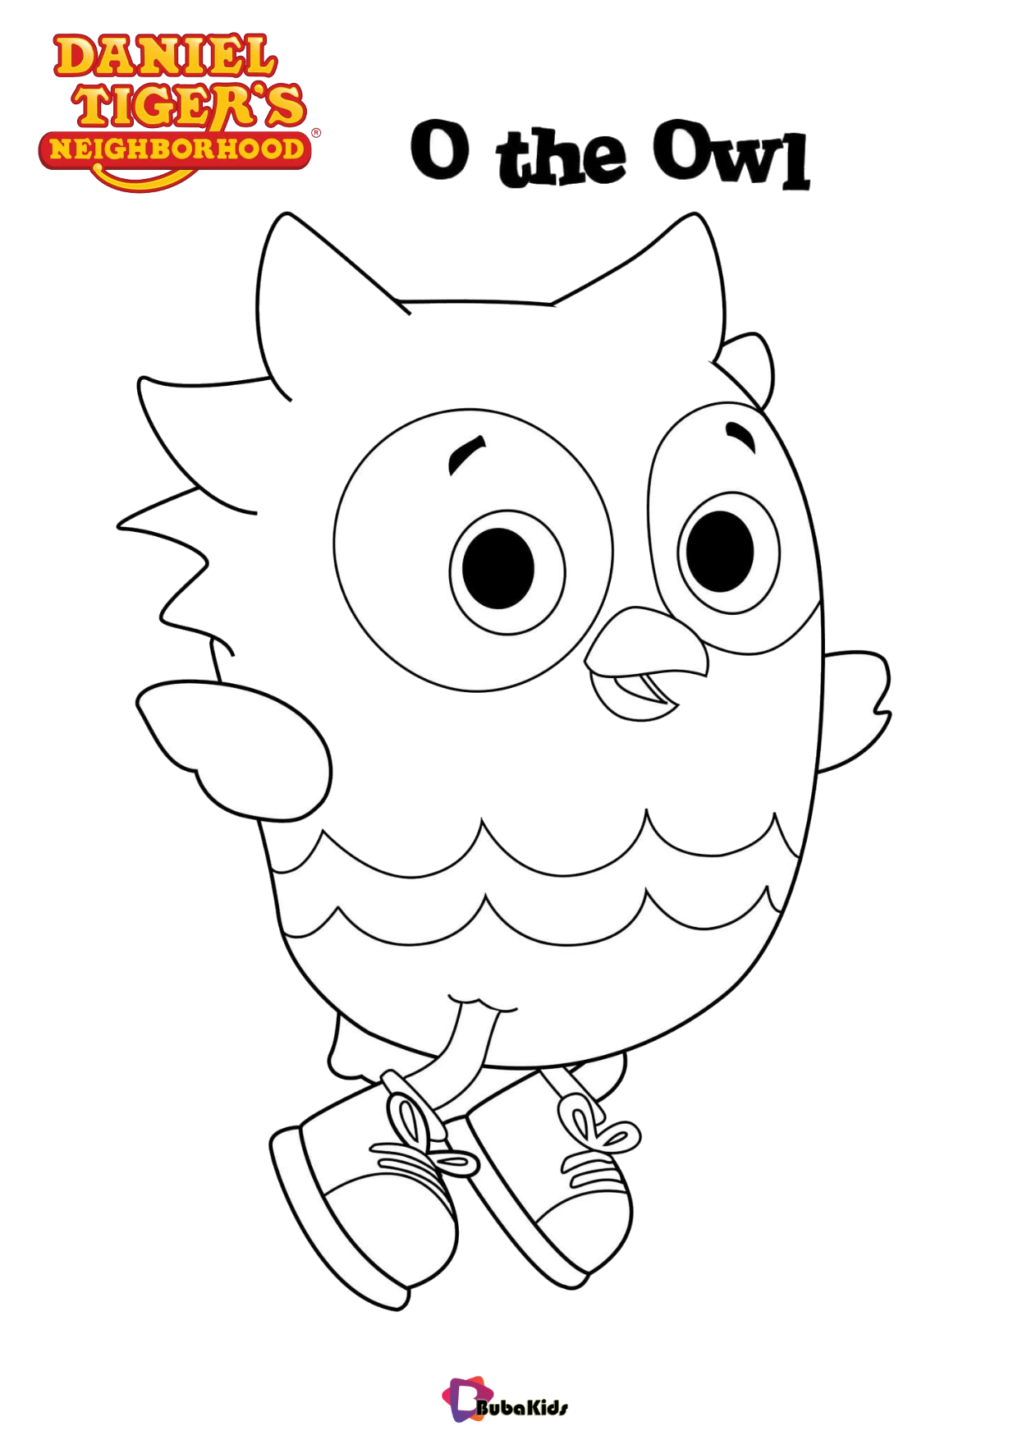 O the owl character from tv series Daniel Tigers Neighborhood coloring page